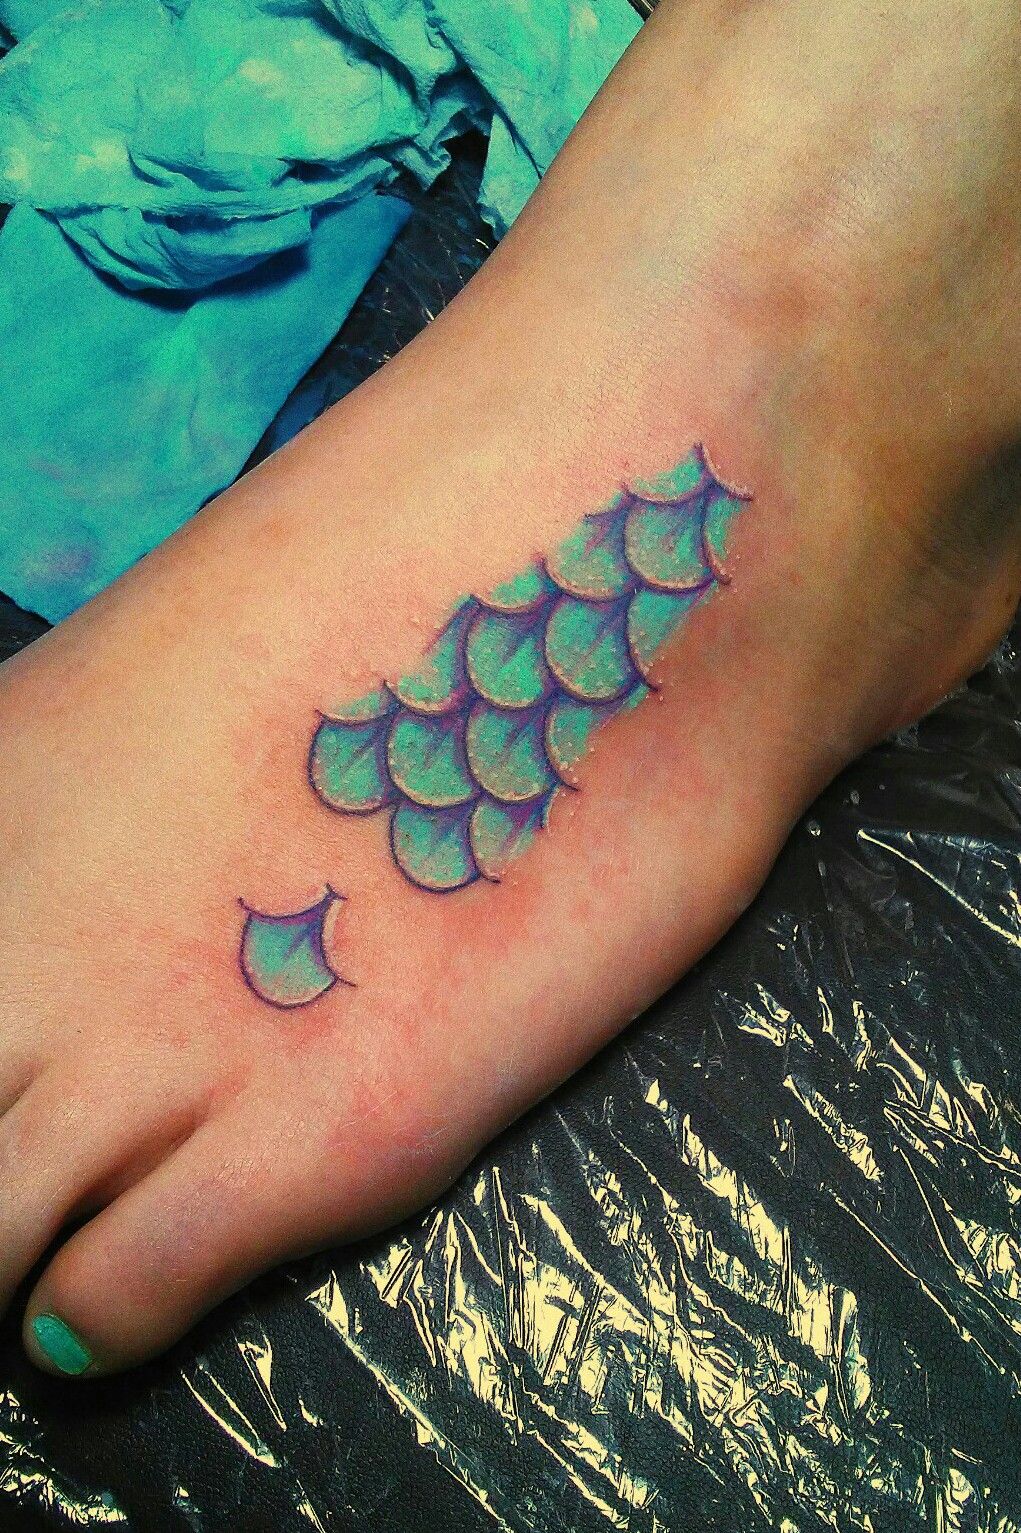 Justin Stephan on Twitter Mermaid scales I did on a hip with some water  droplets I get to do fun water tattoos having a shop near the beach  httpstcoohbiS8tQA6  X